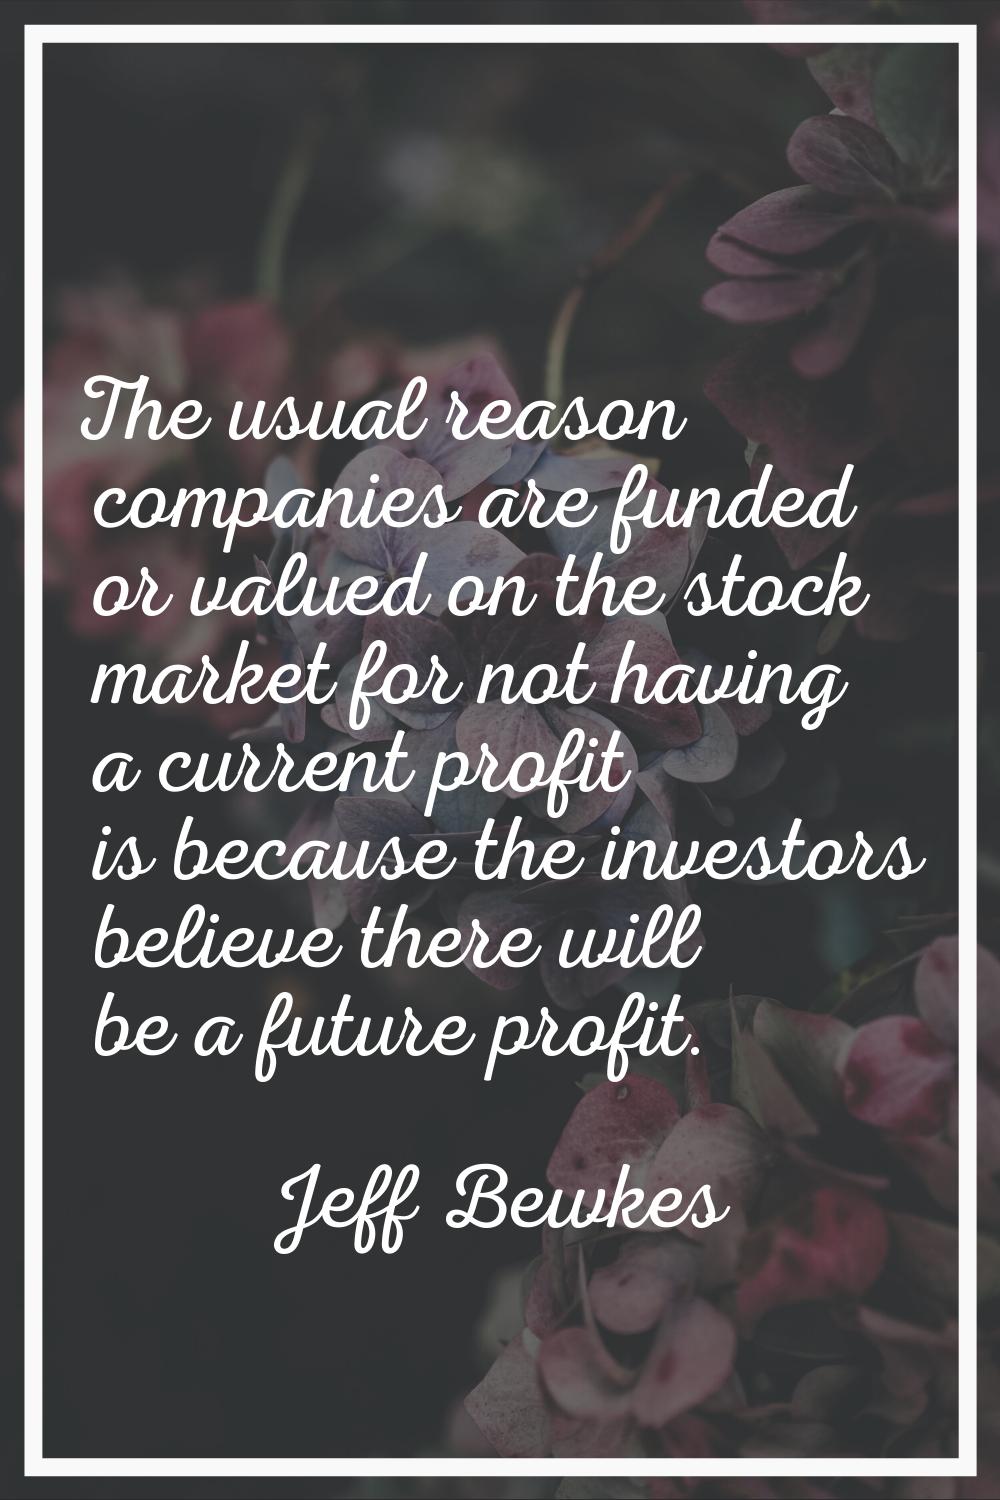 The usual reason companies are funded or valued on the stock market for not having a current profit